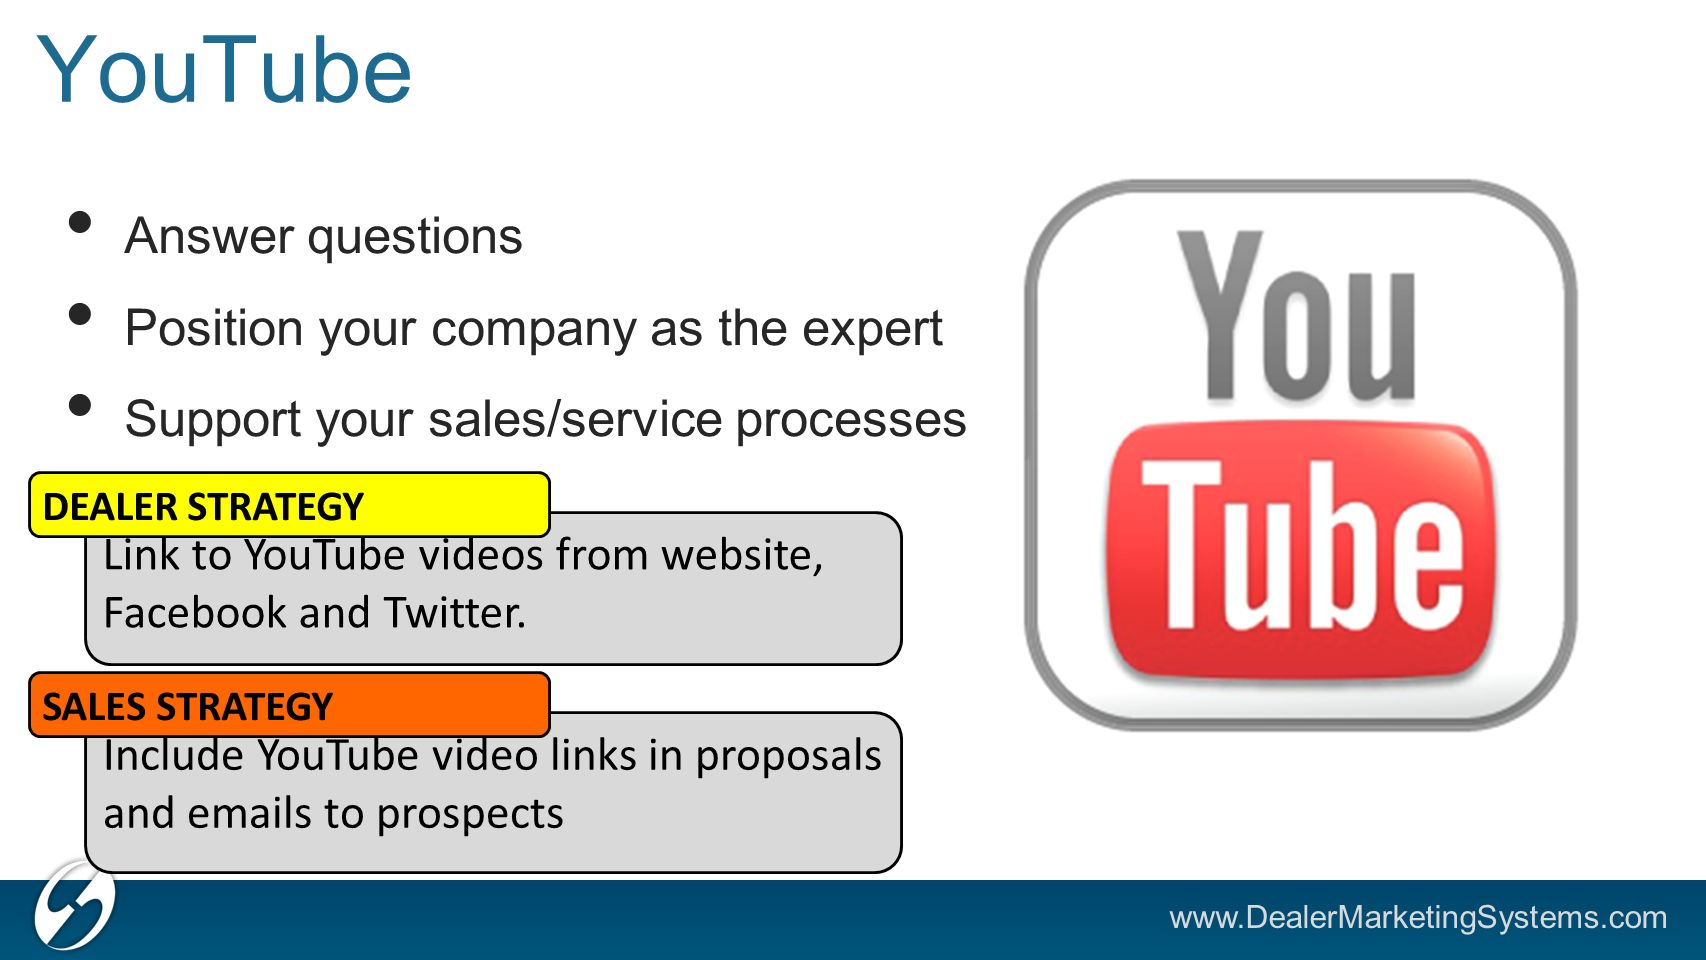 YouTube Answer questions Position your company as the expert Support your sales/service processes Link to YouTube videos from website, Facebook and Twitter.